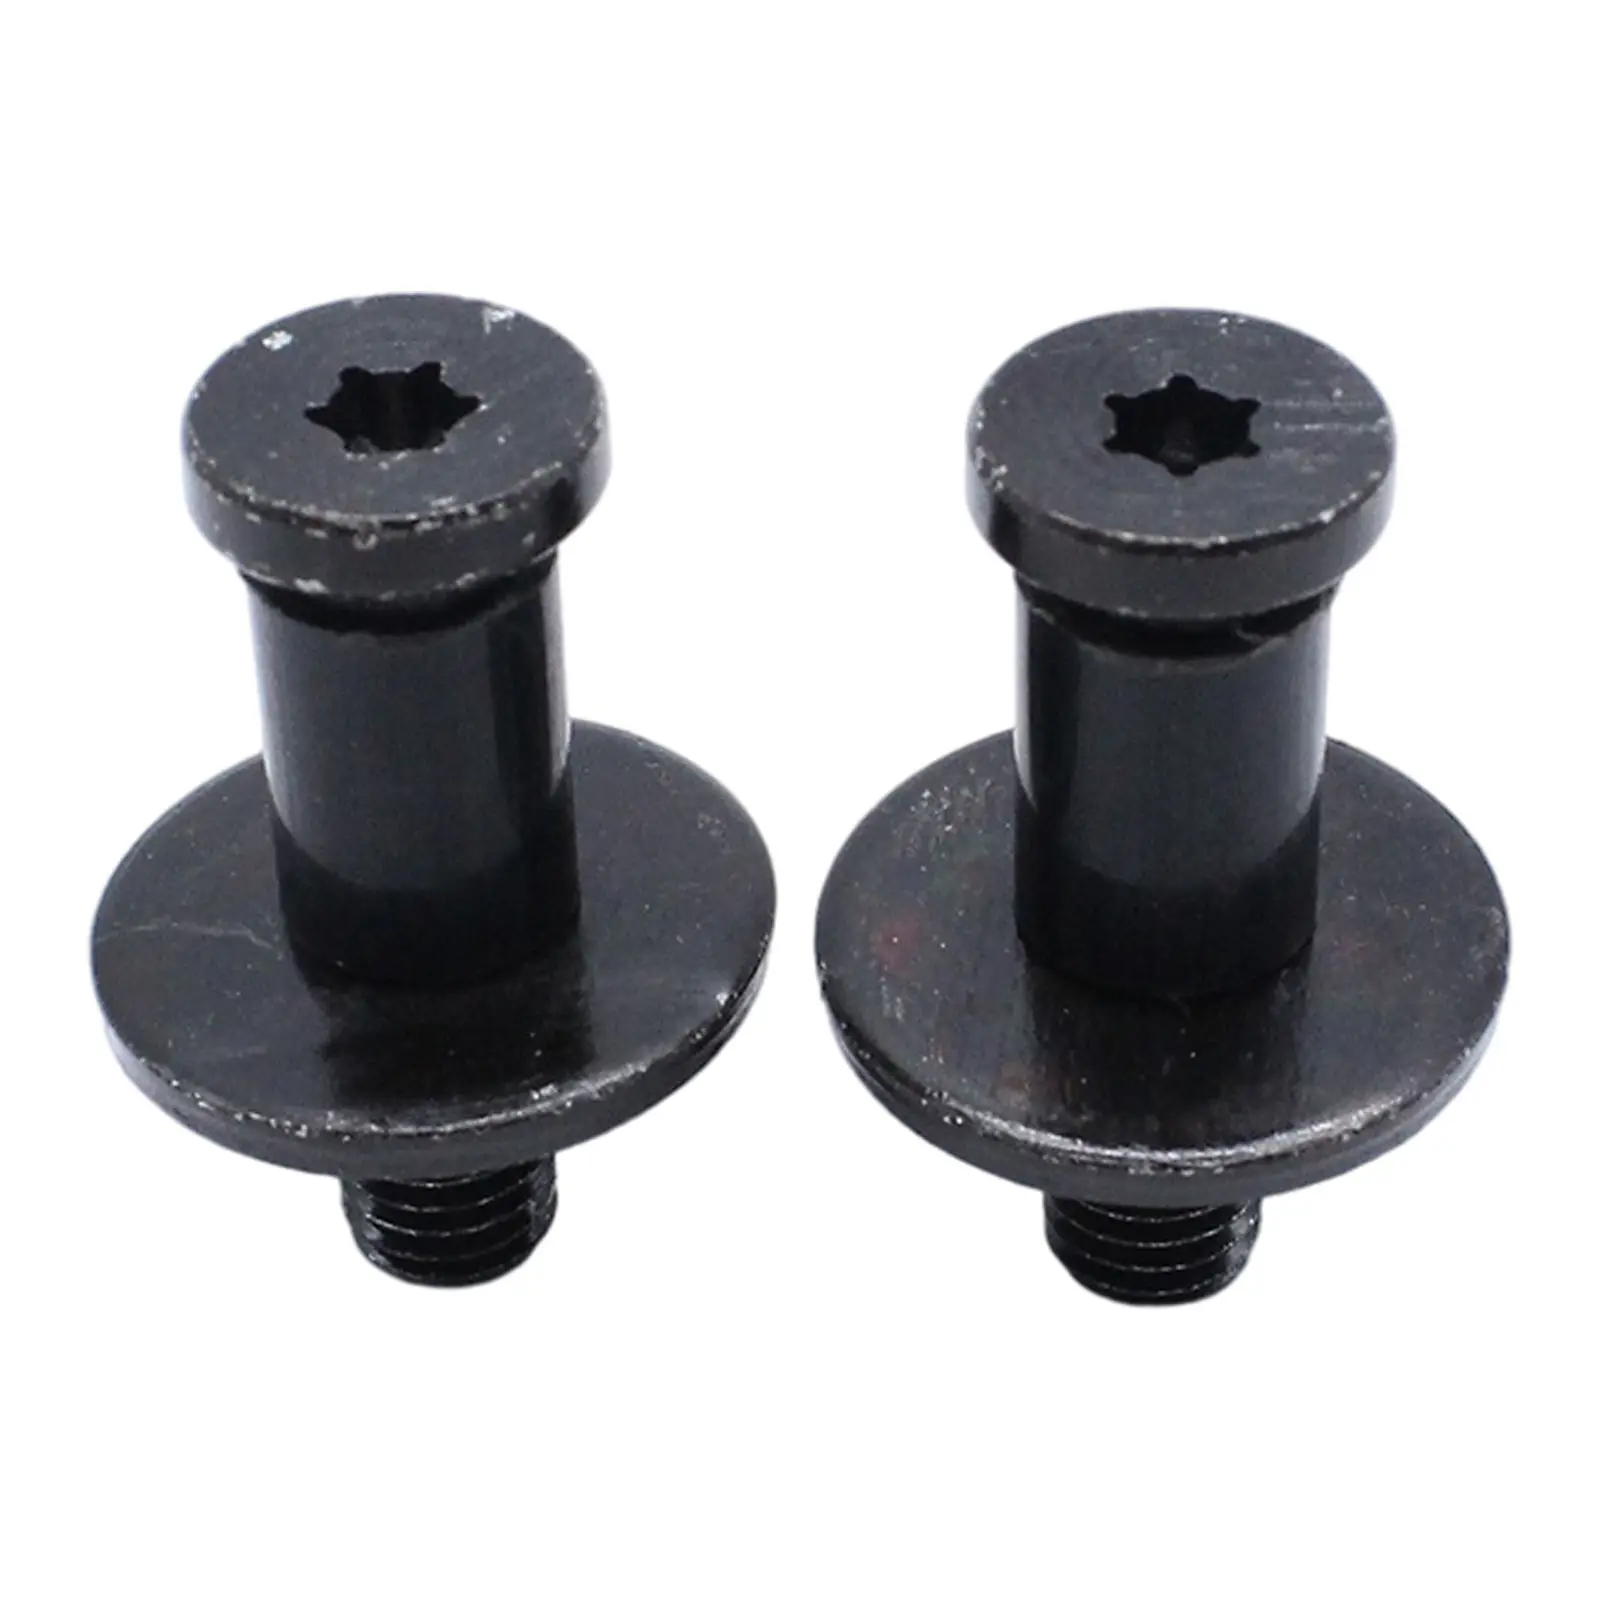 2 Pieces Tailgate Striker Bolt 38427 Set of 2 with Nuts Pair Replace Door Latch Fit for GMC Sierra Chevrolet Avalanche